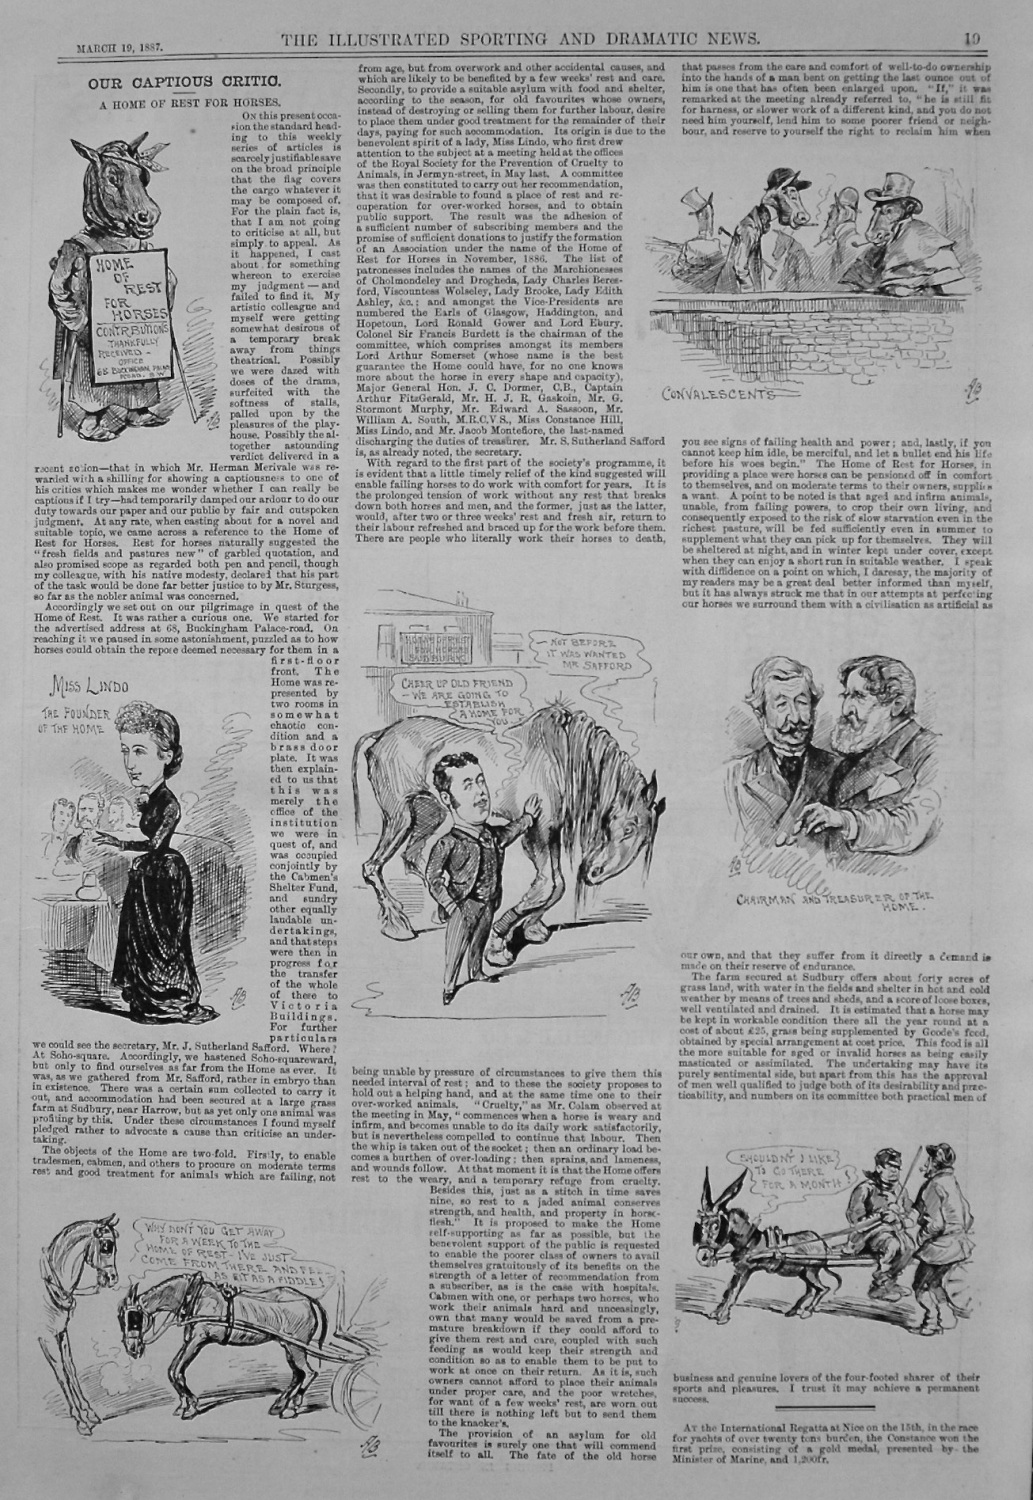 Our Captious Critic. A Home of Rest for Horses. 1887